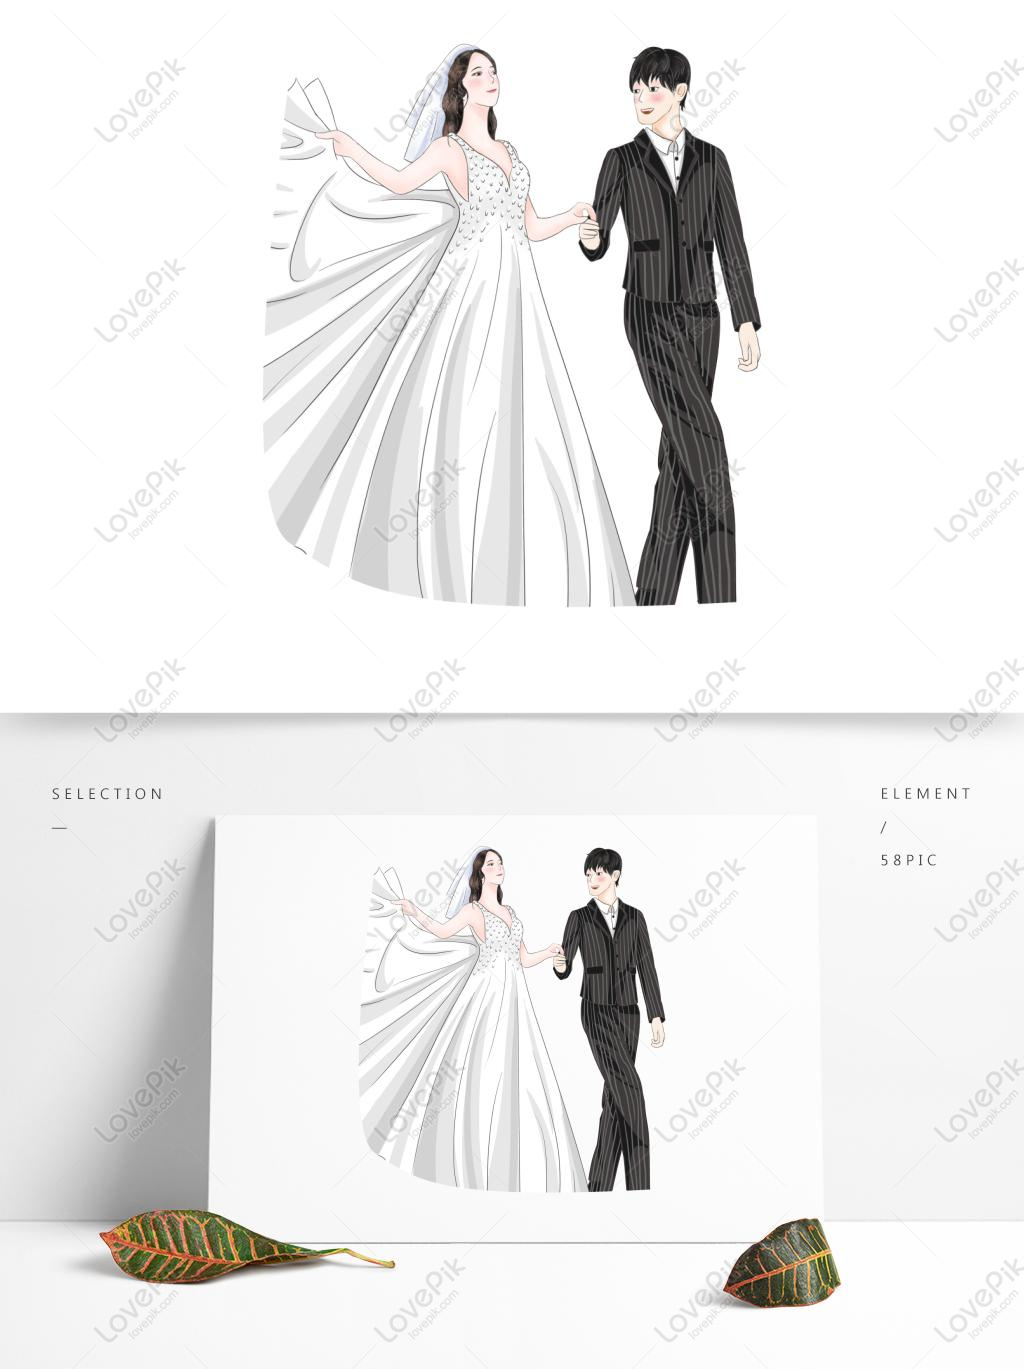 Wedding Bride Groom Character Decoration Material PNG Hd Transparent Image  PSD images free download_1369 × 1024 px - Lovepik